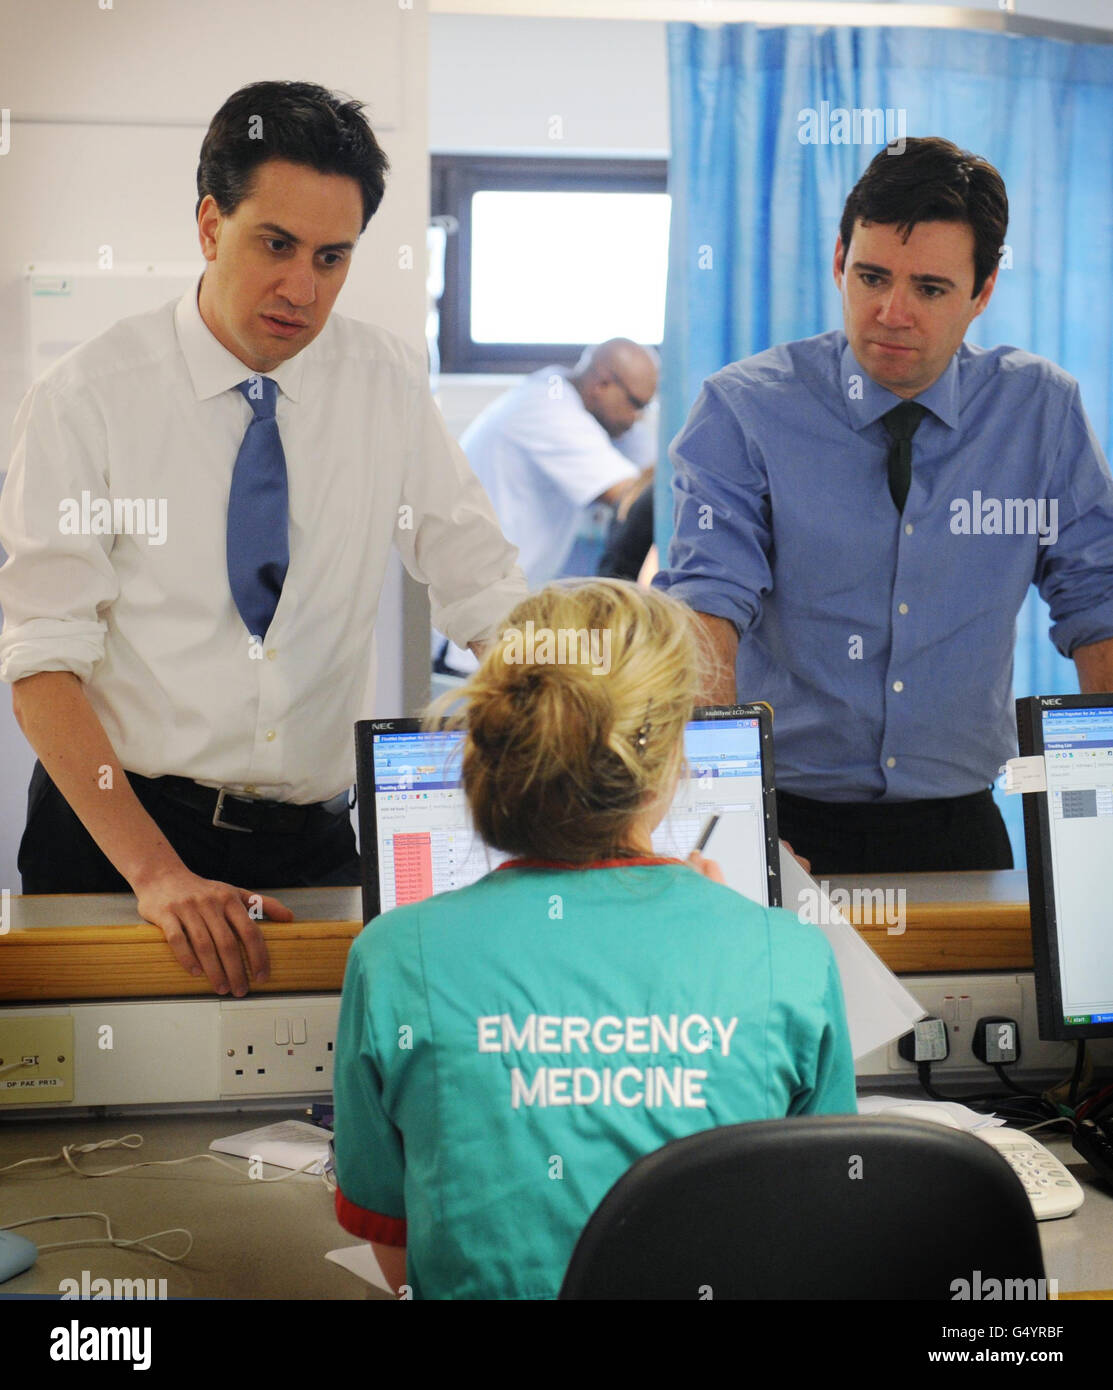 Labour leader Ed Miliband and shadow health secretary Andy Burnham (right) meet staff during a visit to the Homerton Hospital in Hackney, east London. Stock Photo